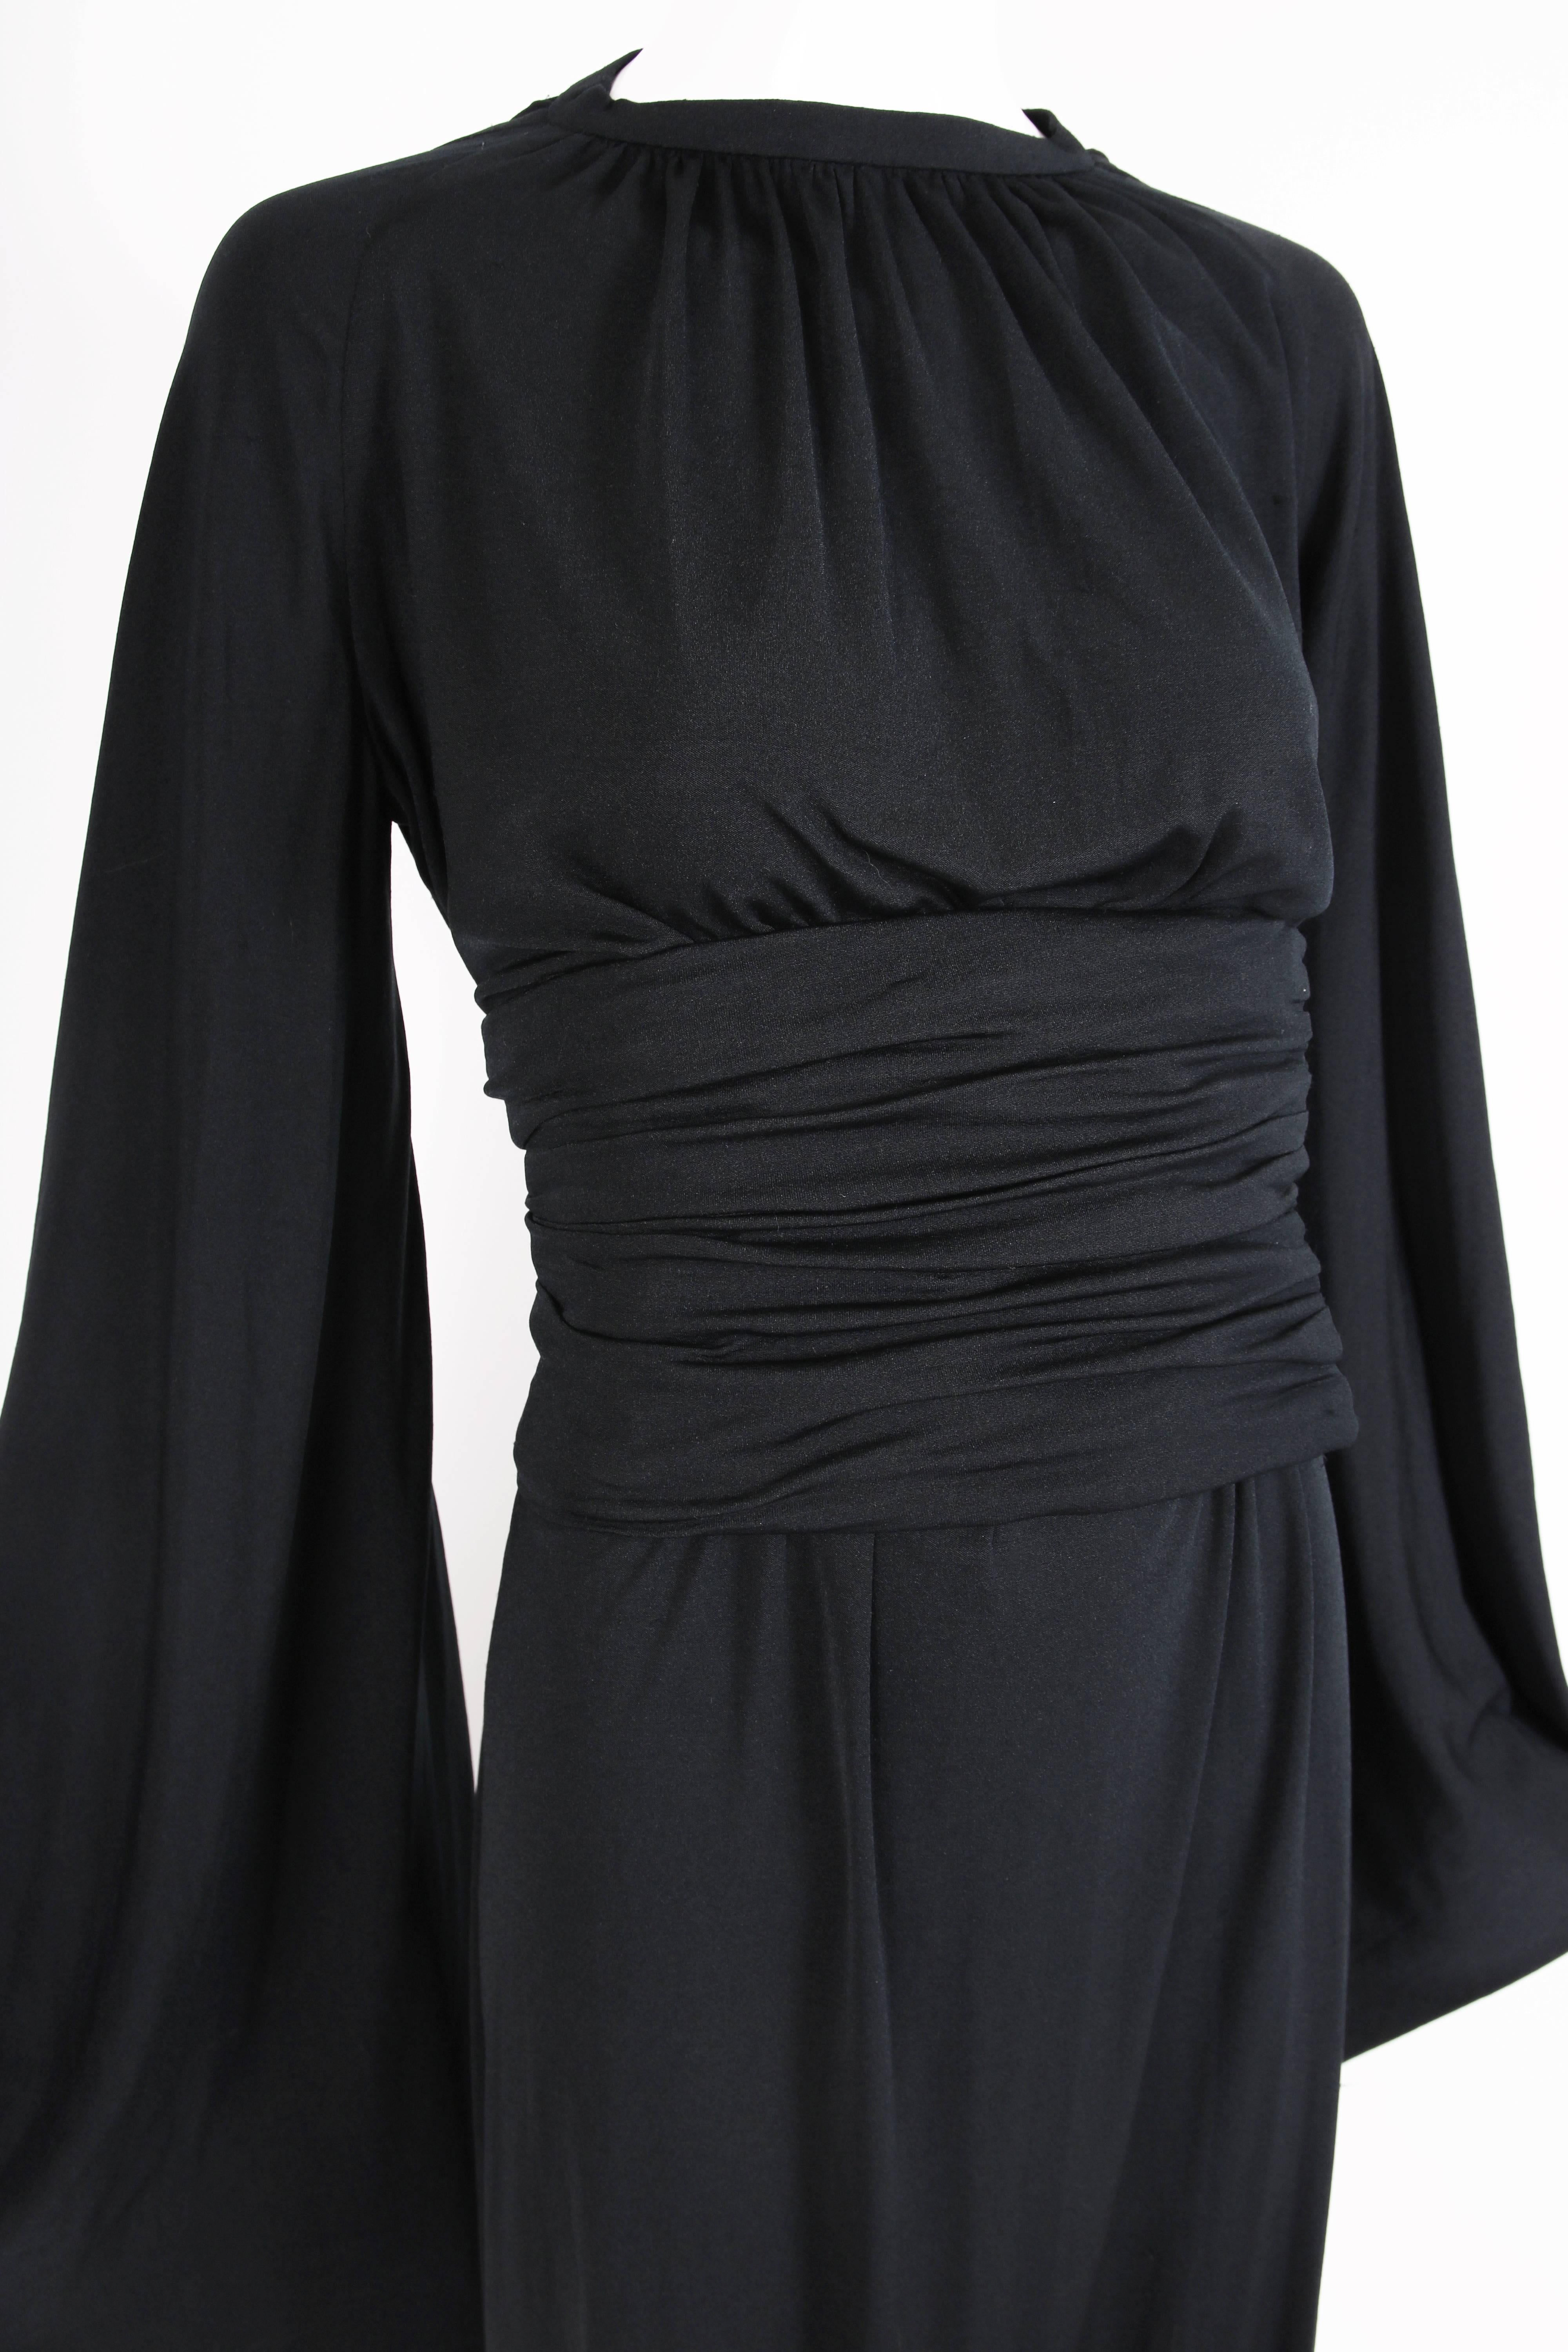 Ca. 1977 Pierre Cardin Haute Couture Black Harem Dress w/Pagoda Sleeves In Excellent Condition For Sale In Studio City, CA